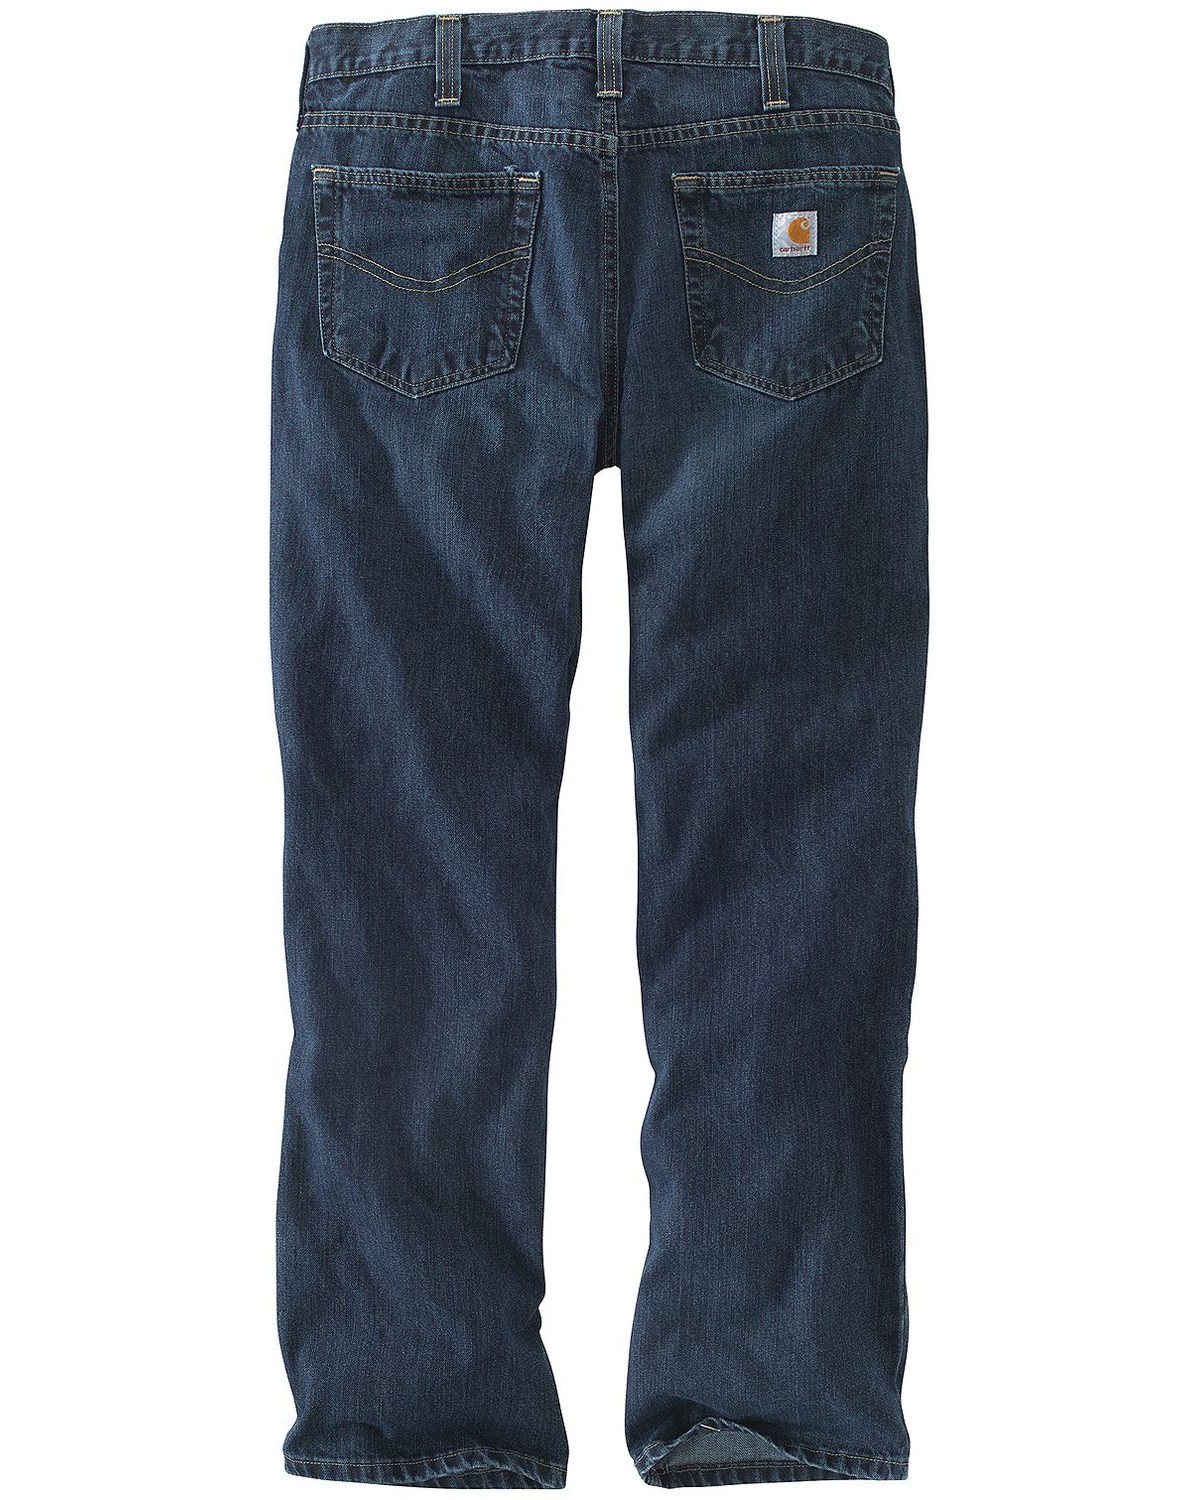 Carhartt Workwear Men's Relaxed Fit Holter Jeans